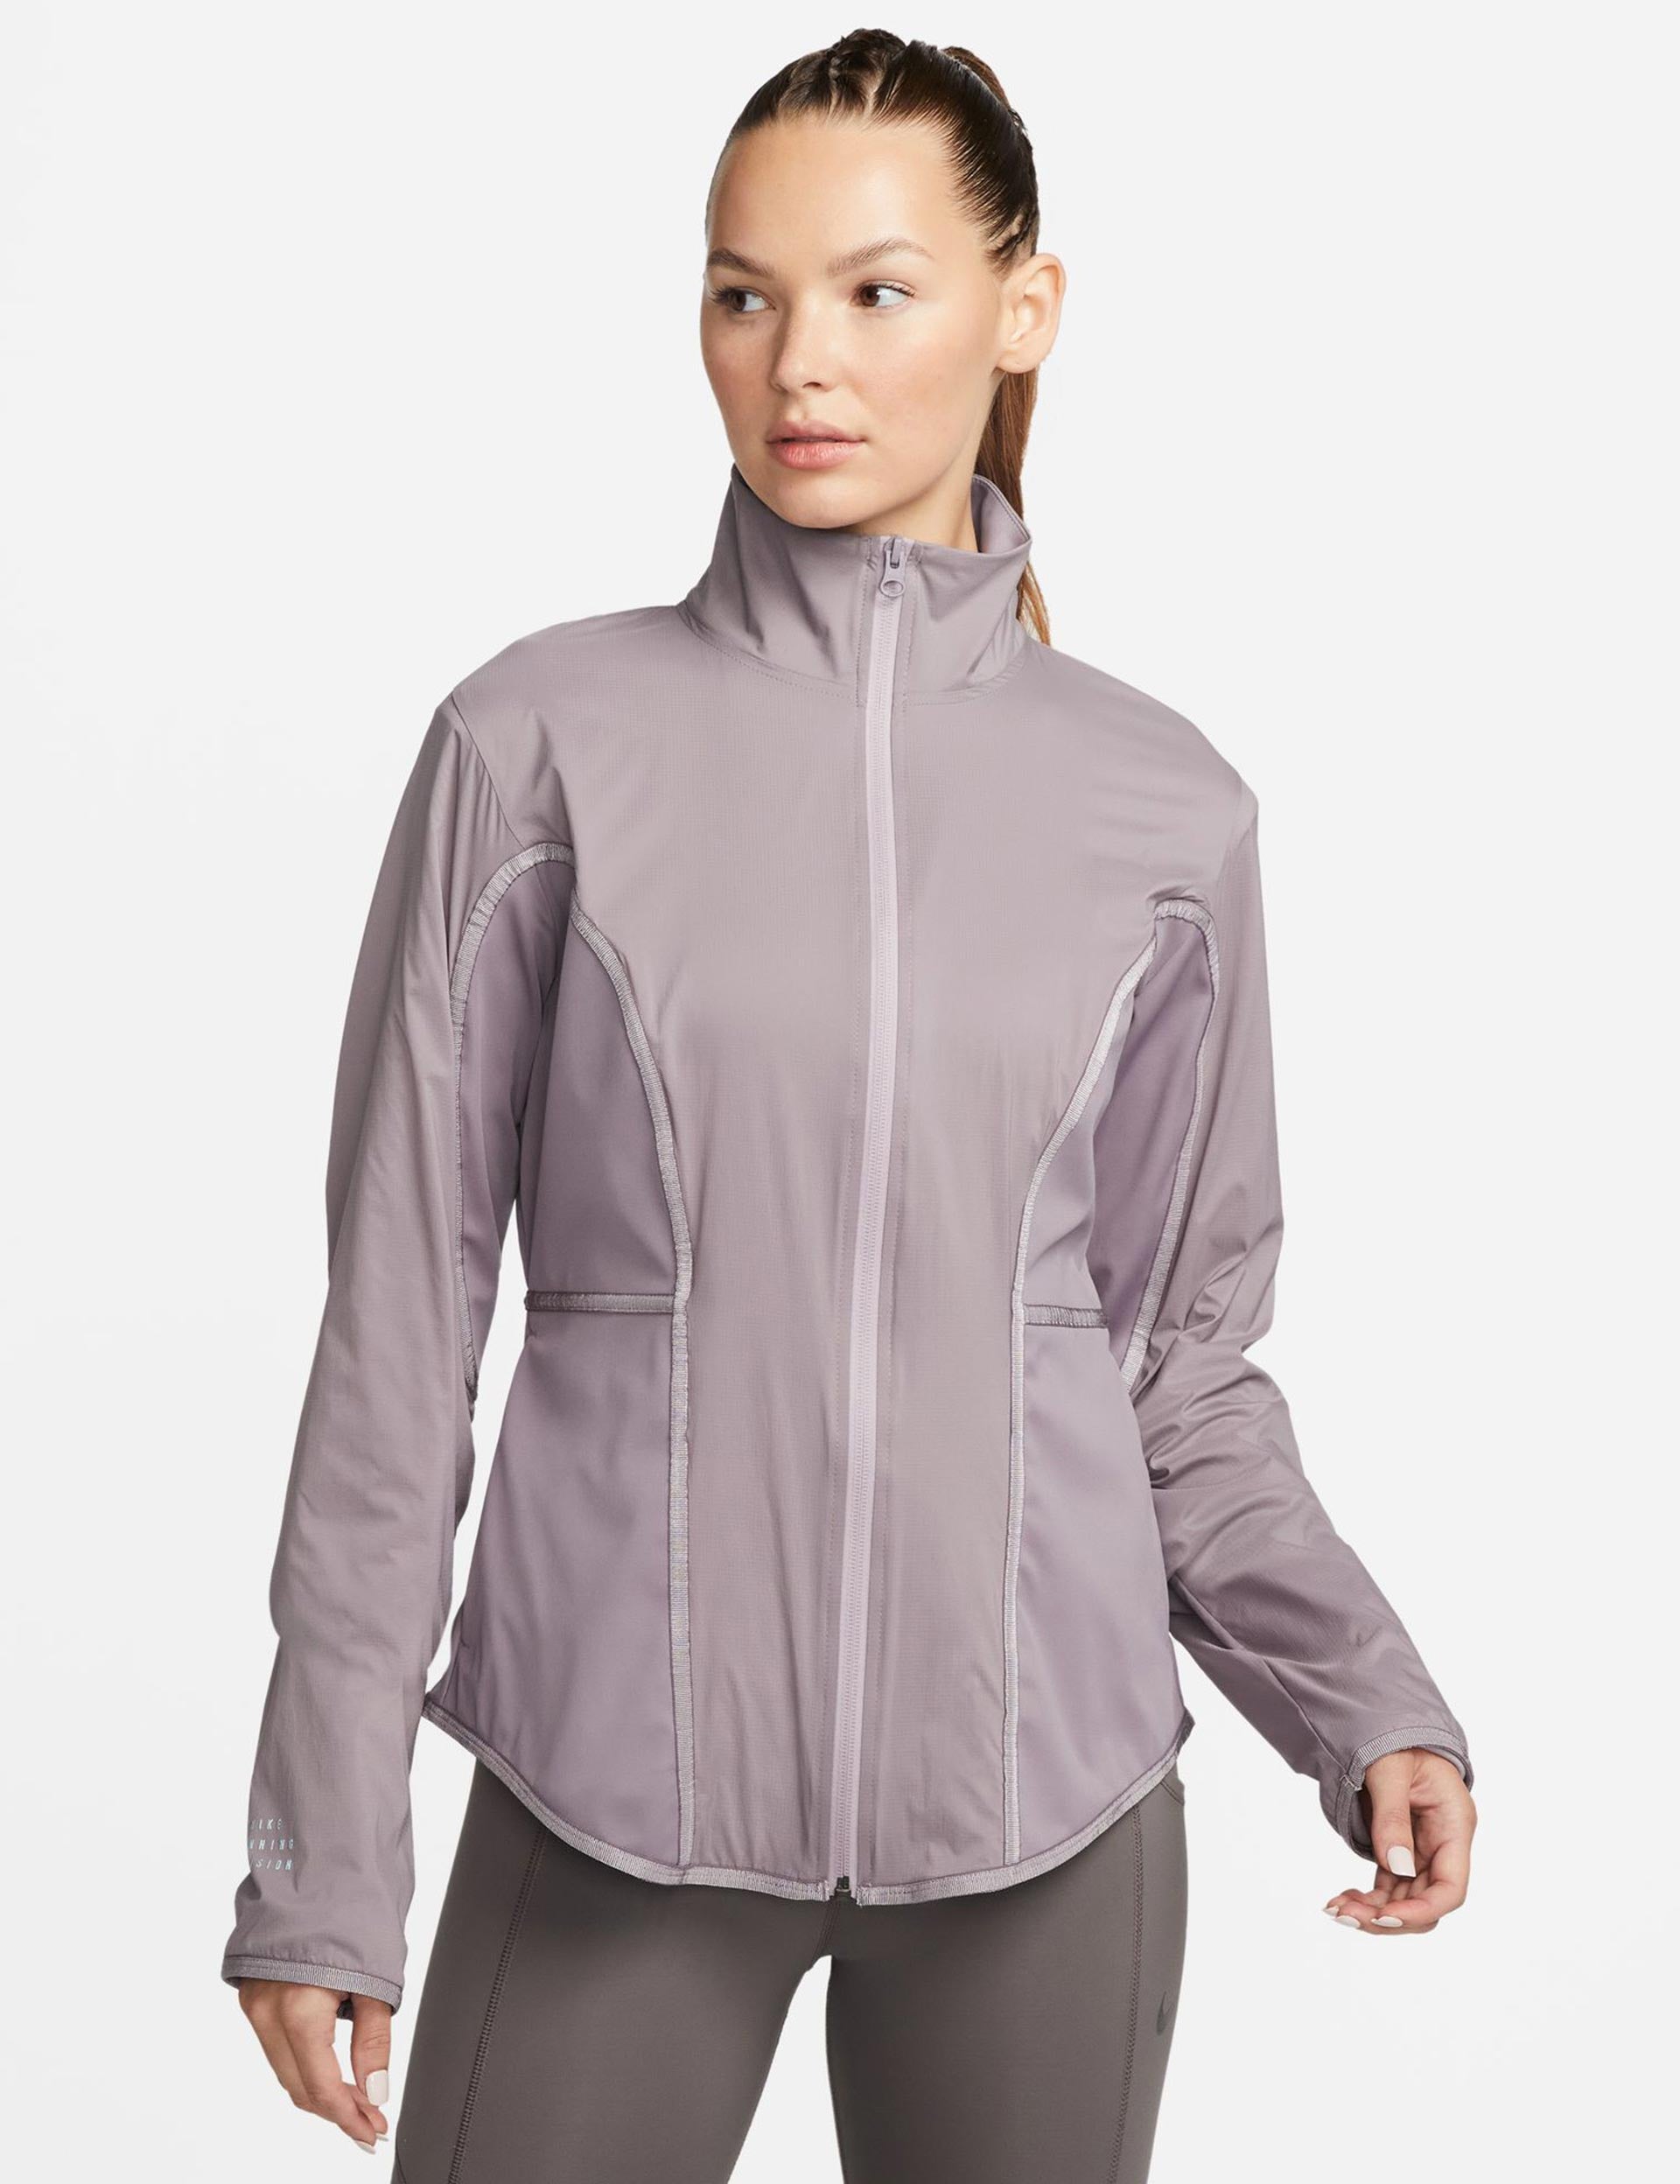 Nike | Storm-FIT Run Division Jacket - Purple | The Sports Edit